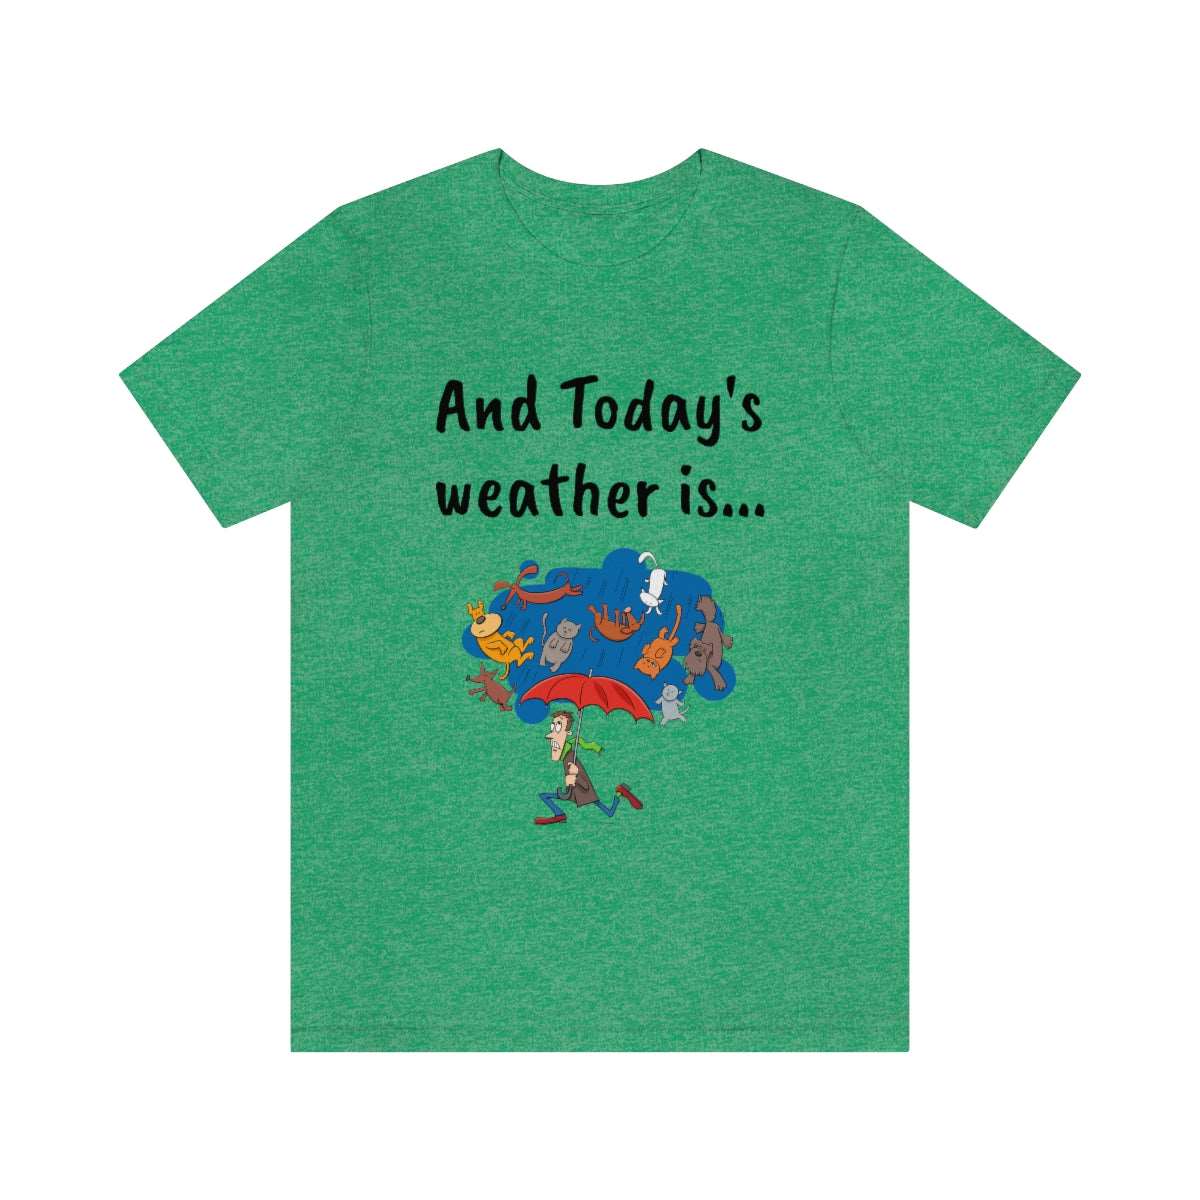 And todays Weather is... - Funny Unisex Short Sleeve Tee